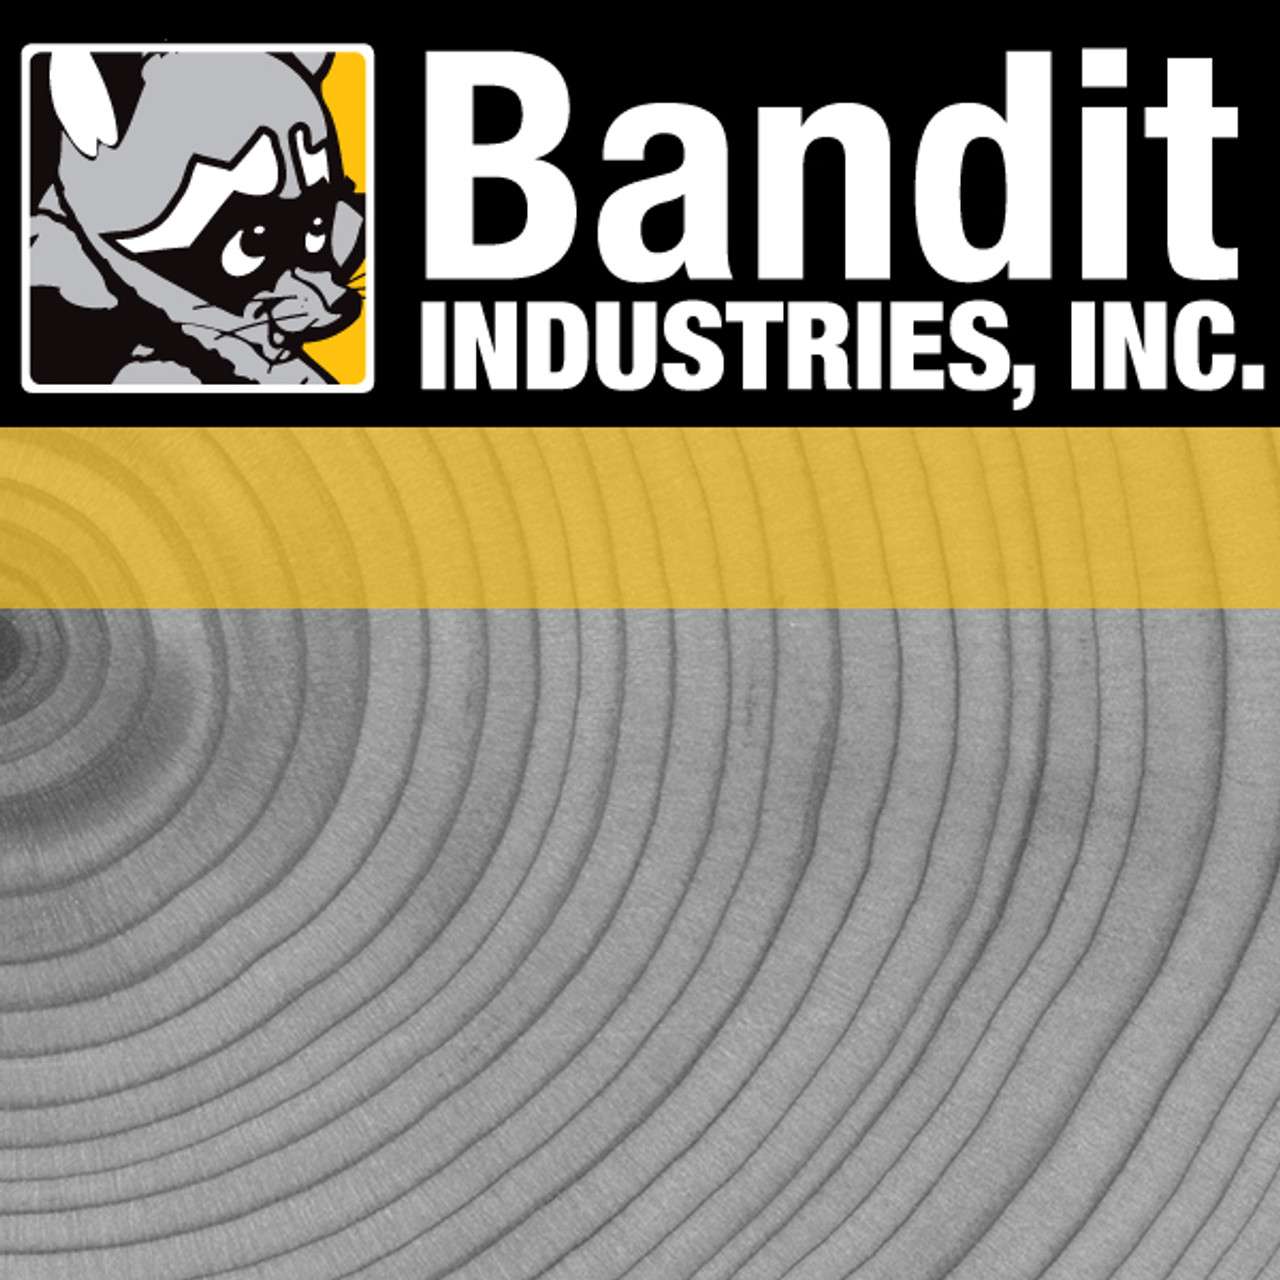 900-1920-14: BANDIT CHAIN, RIVETED 120HV CUT TO 22 LINKS (64.5"" LENGTHS)